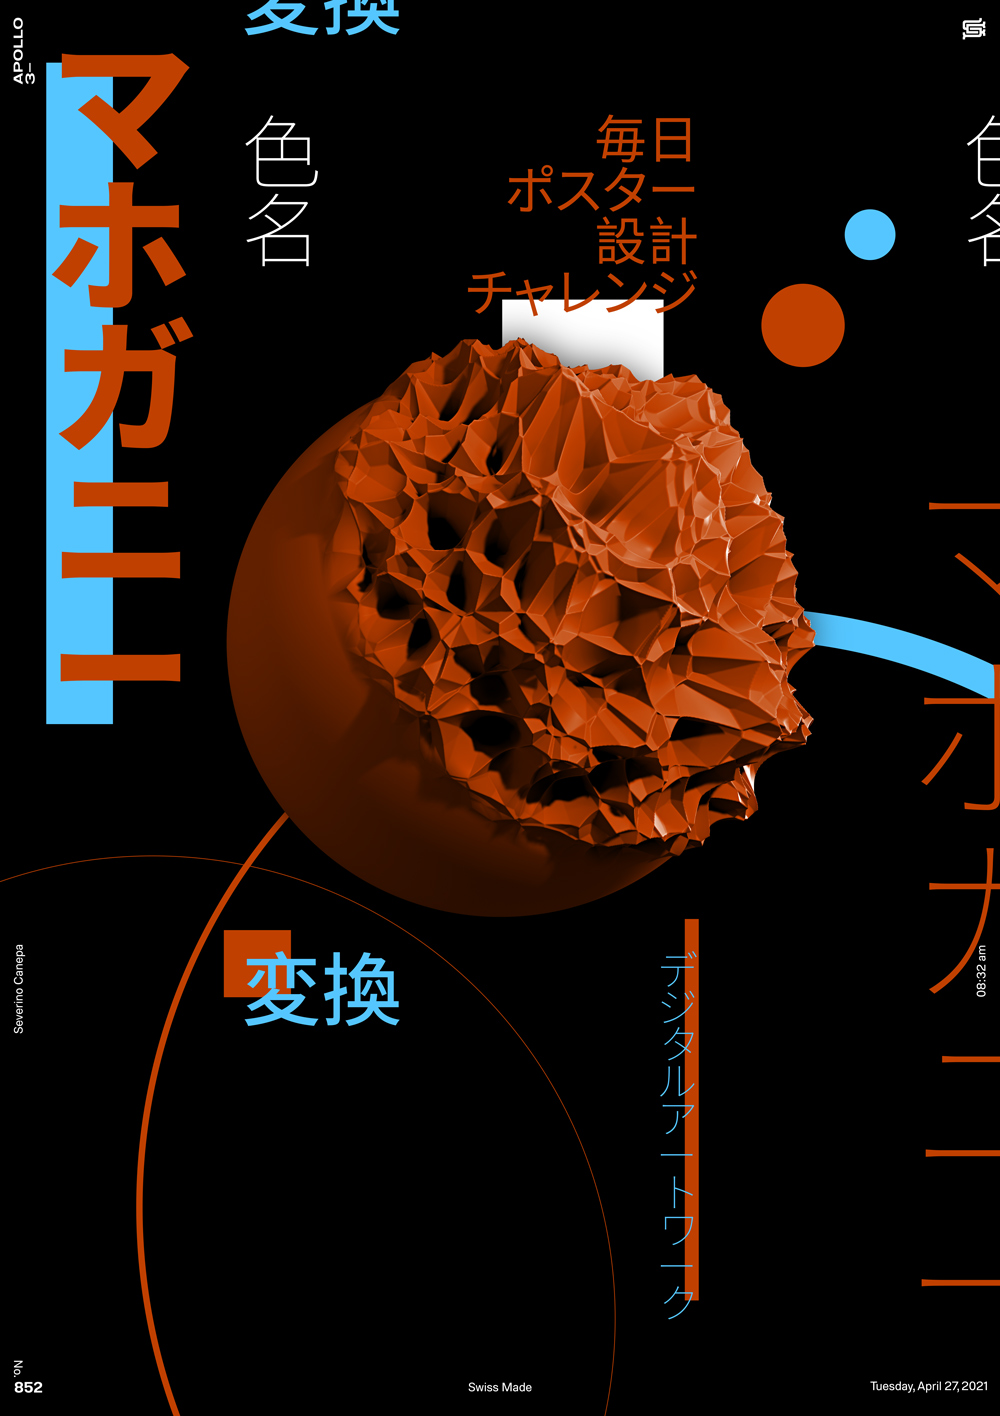 Aerial and spatial digital creation made with 3D element and Japanese Characters